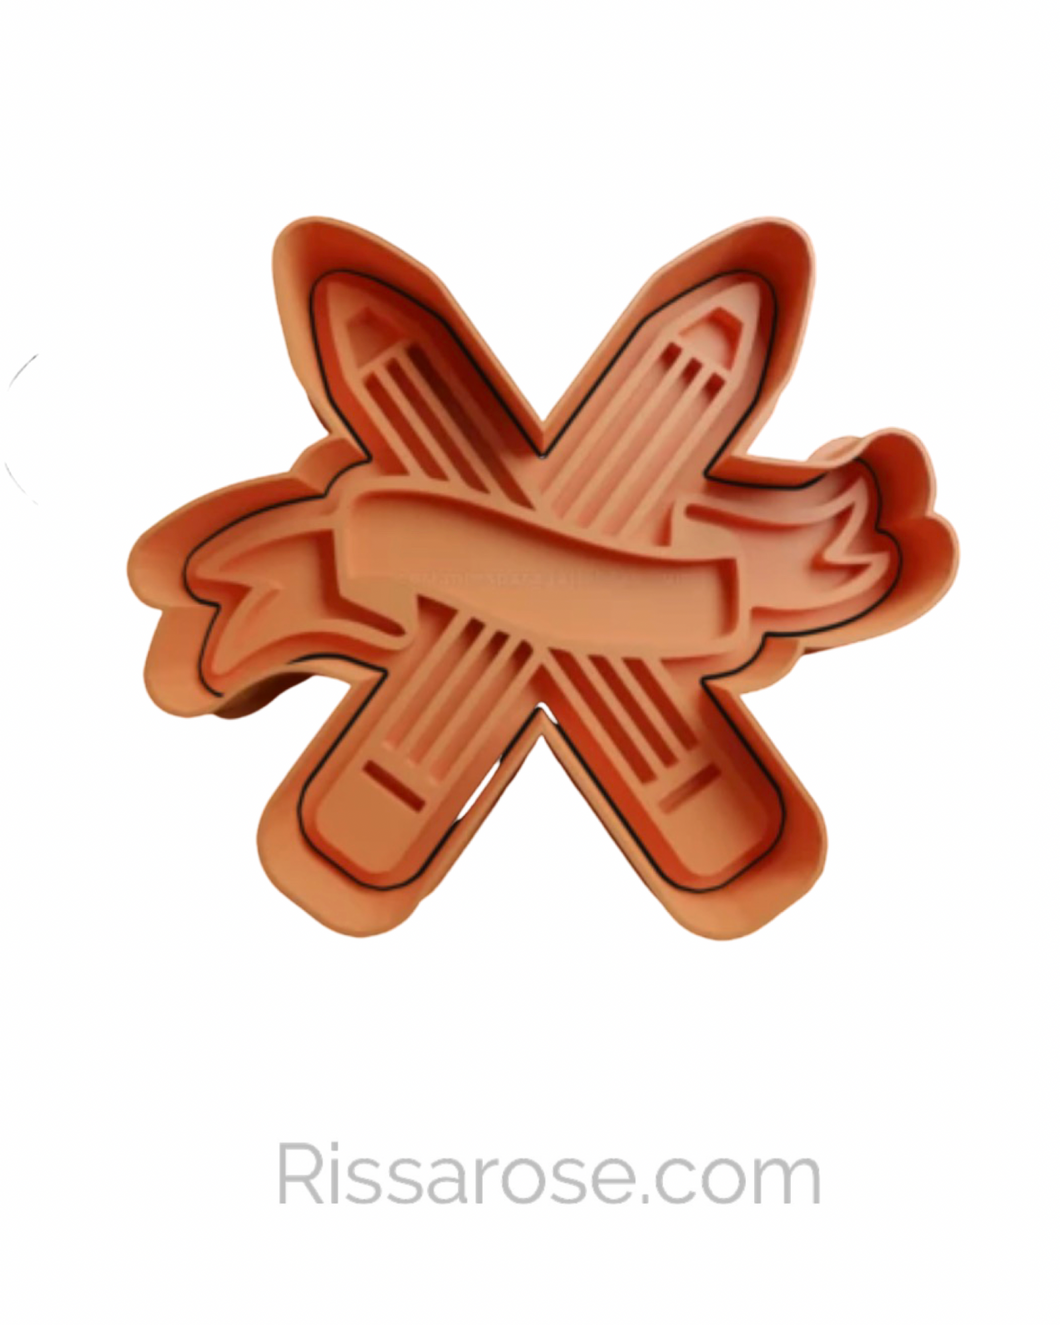 Pencil Ribbon Cookie Cutter Stamp